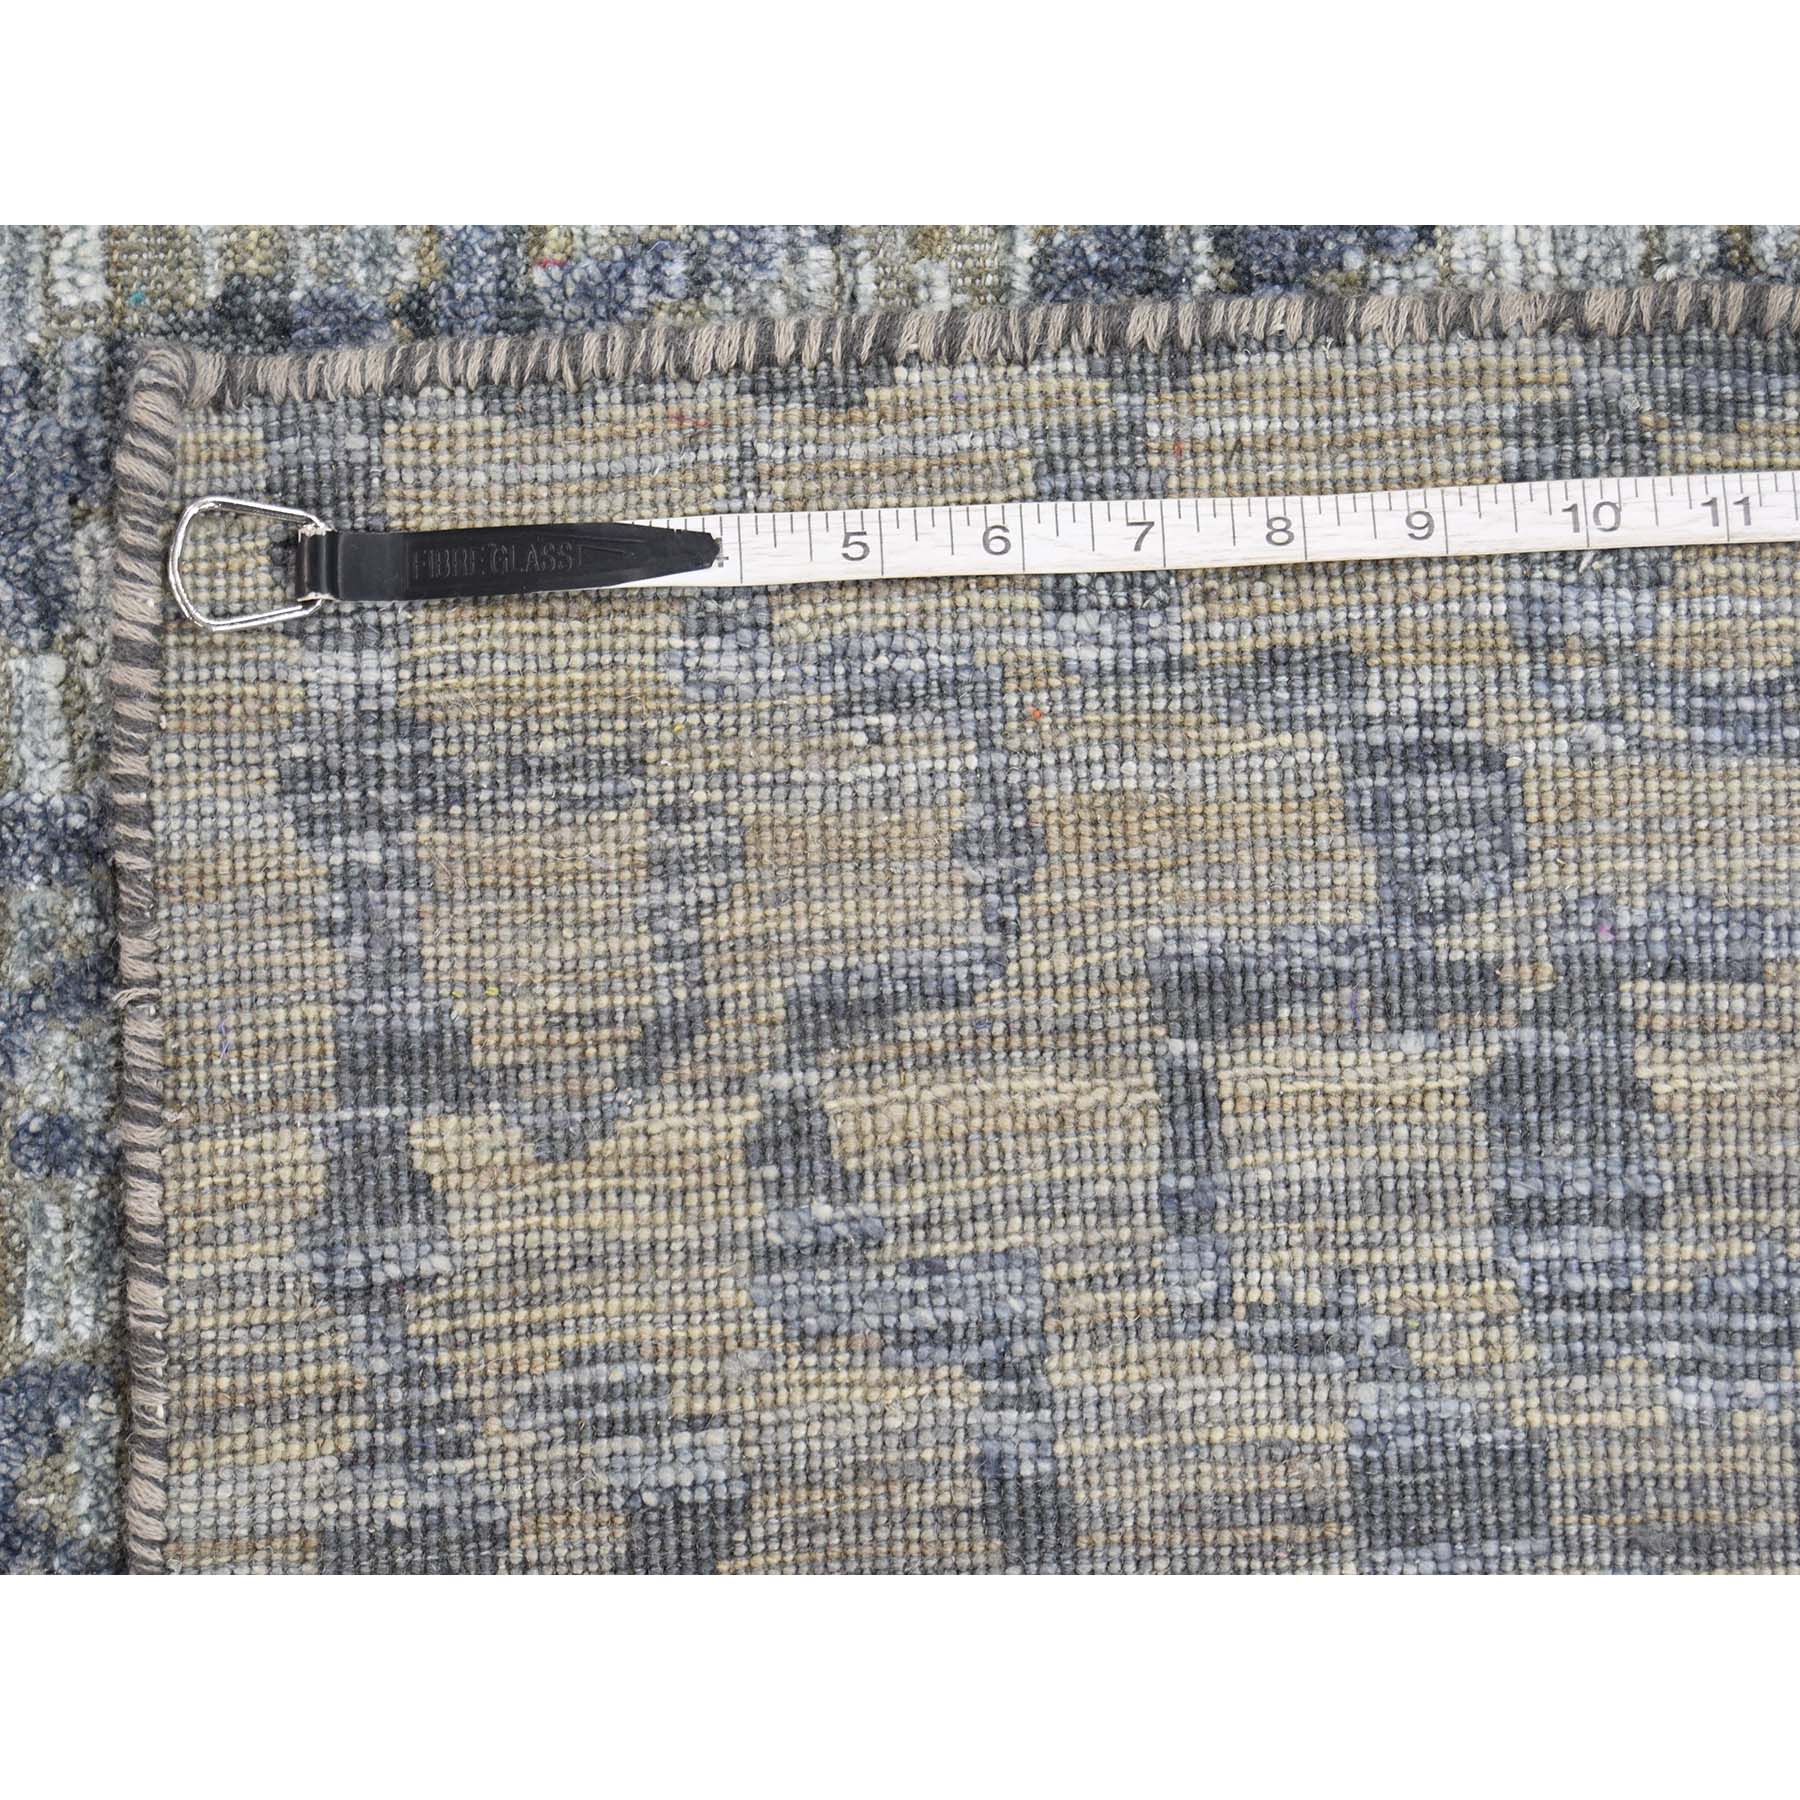 8-x10-1  THE ERASED MOROCCAN Silk with Textured Wool Hand-Knotted Oriental Rug 